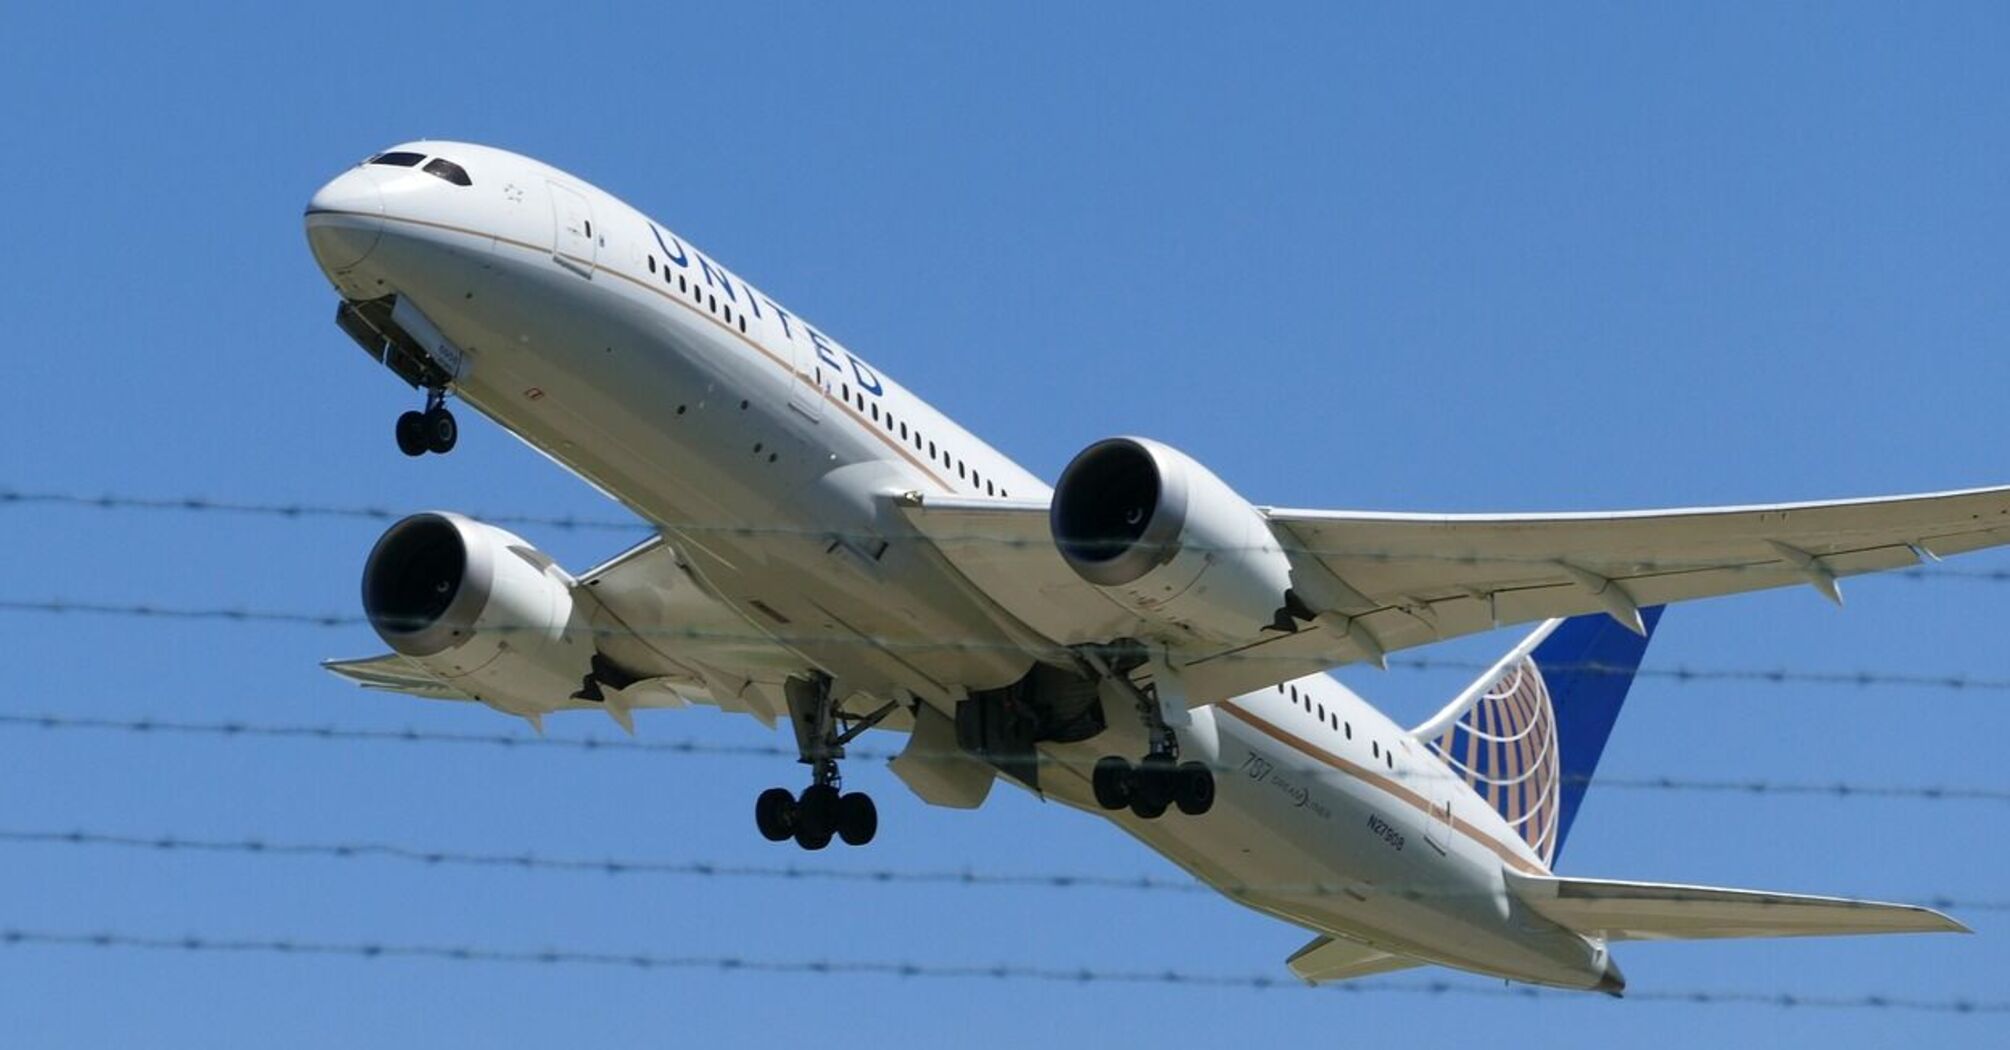 Incident at San Francisco Airport: United Airlines plane lost a tire during takeoff